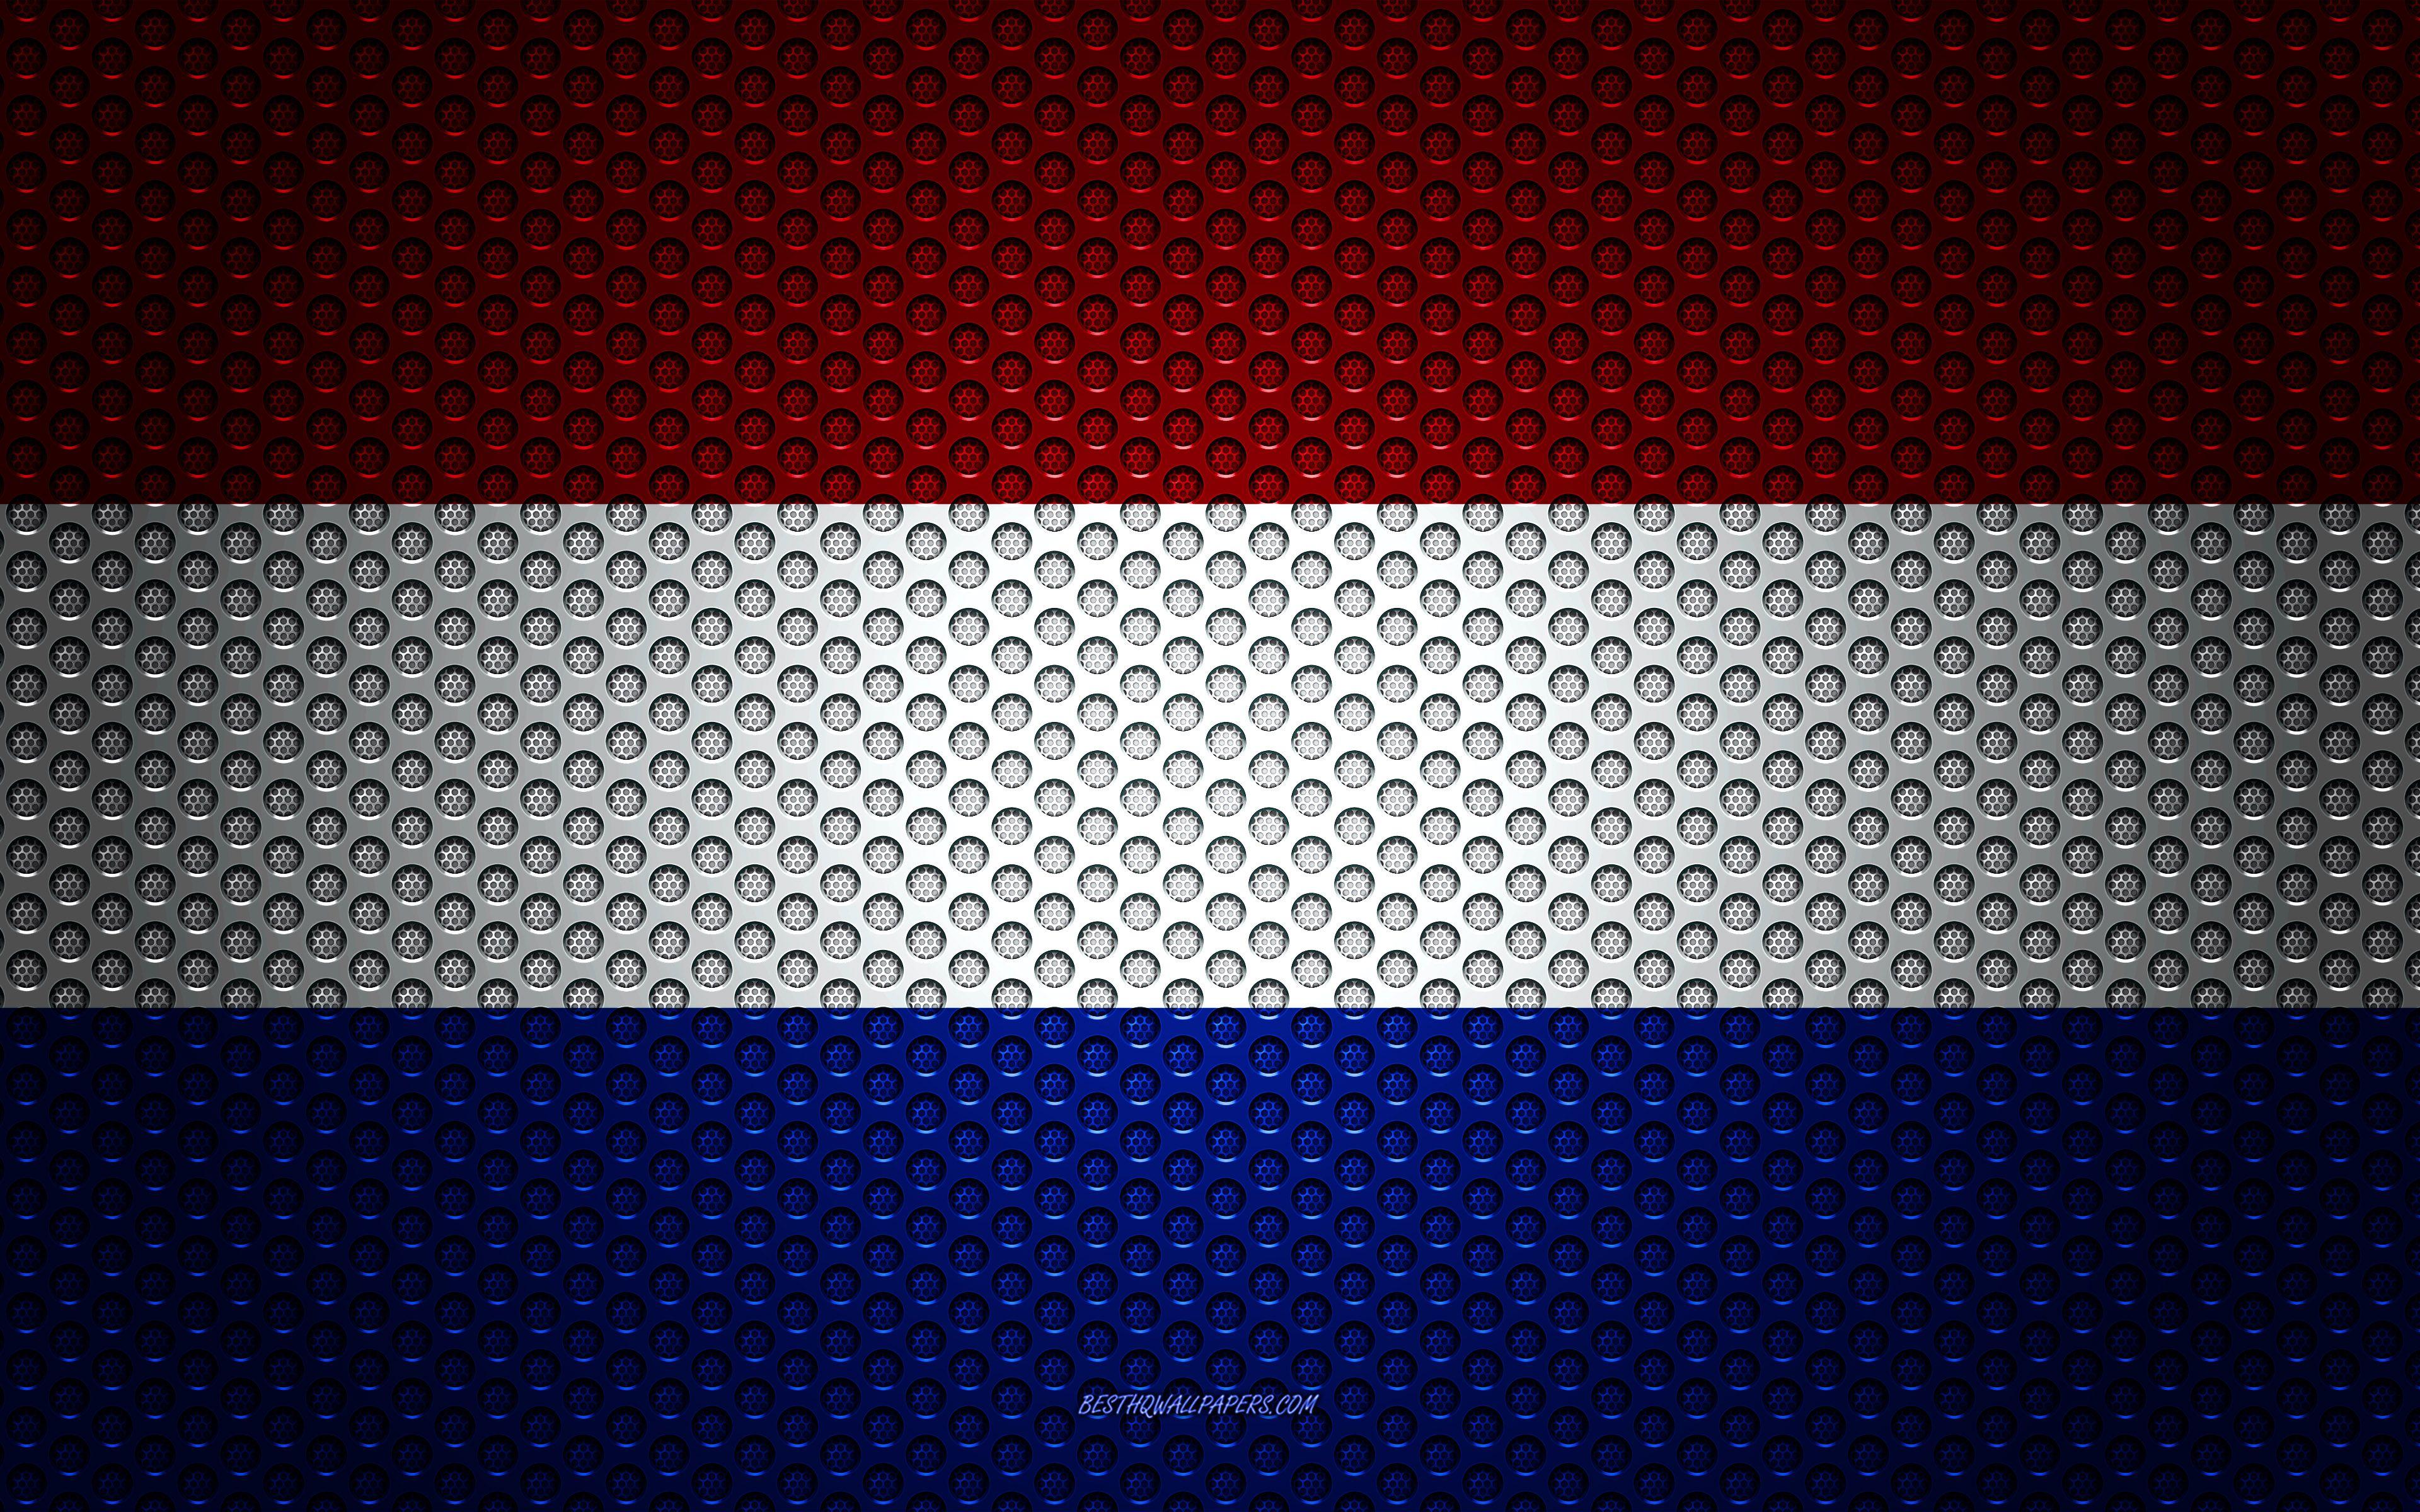 Netherlands Flag Wallpapers Top Free Netherlands Flag Backgrounds Wallpaperaccess